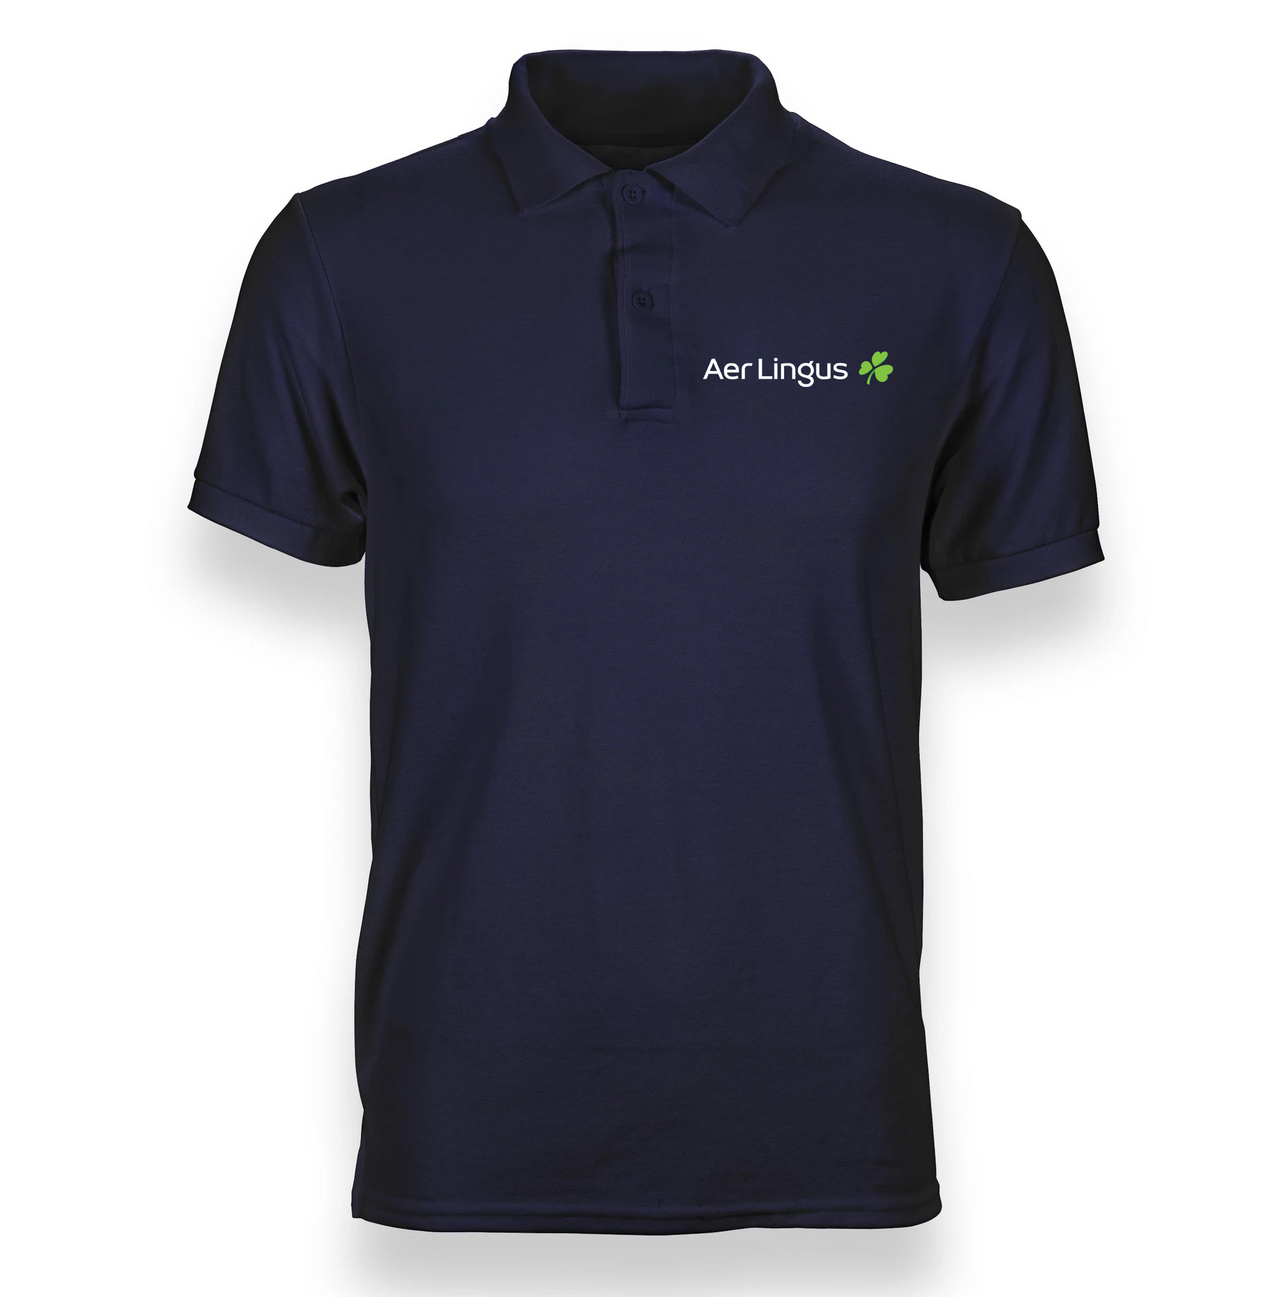 LINGUS AIRLINES POLO T-SHIRT